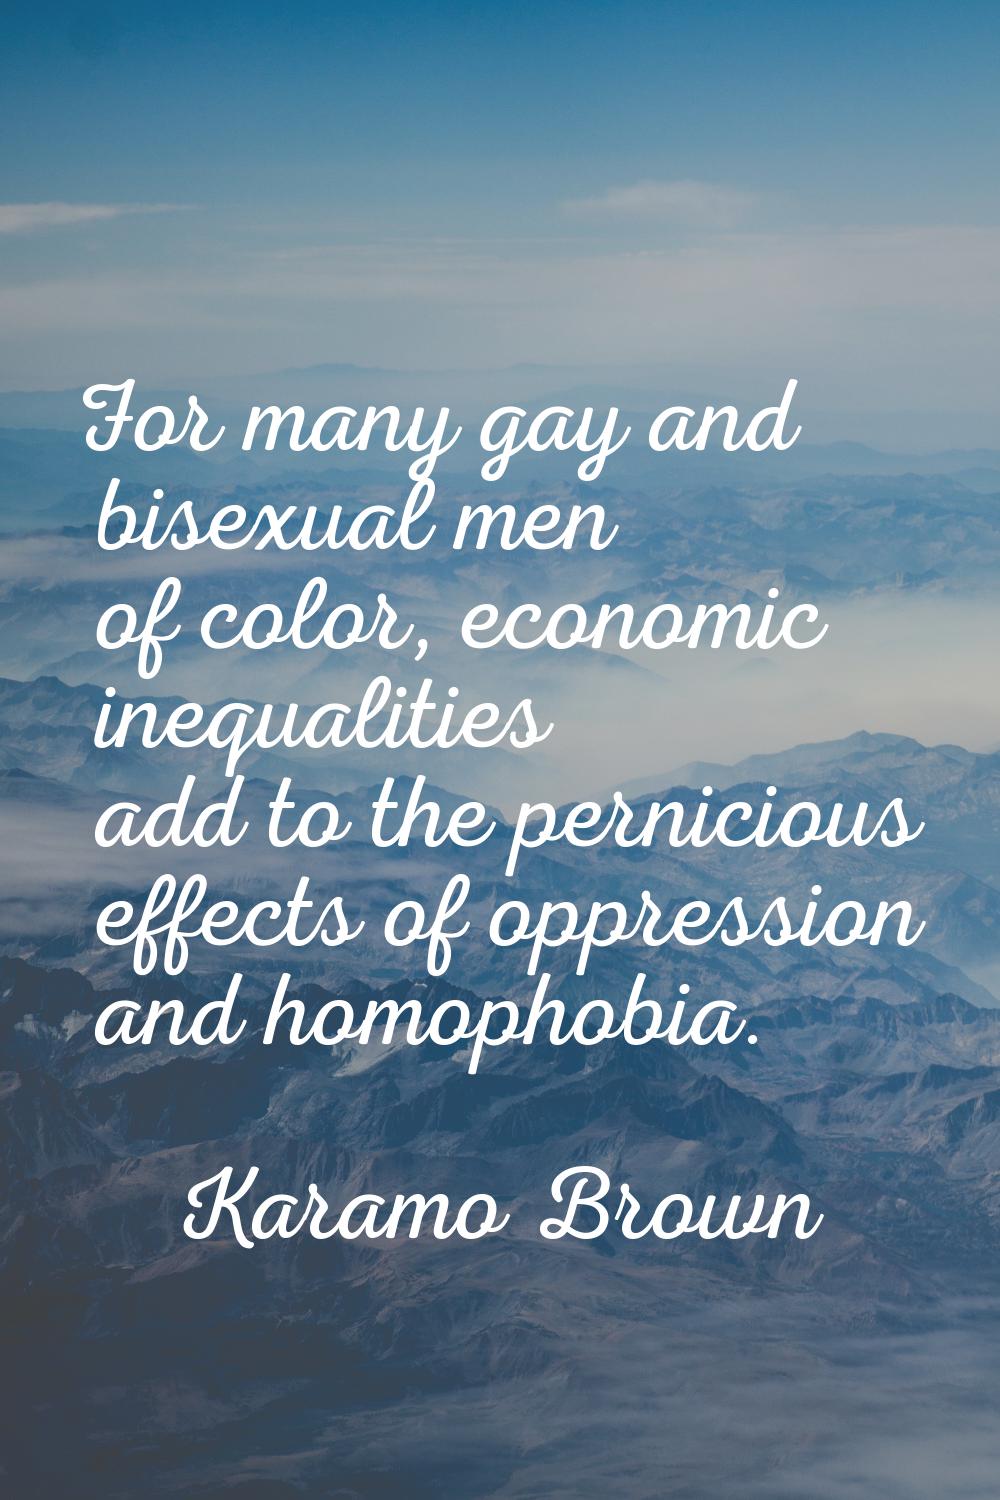 For many gay and bisexual men of color, economic inequalities add to the pernicious effects of oppr